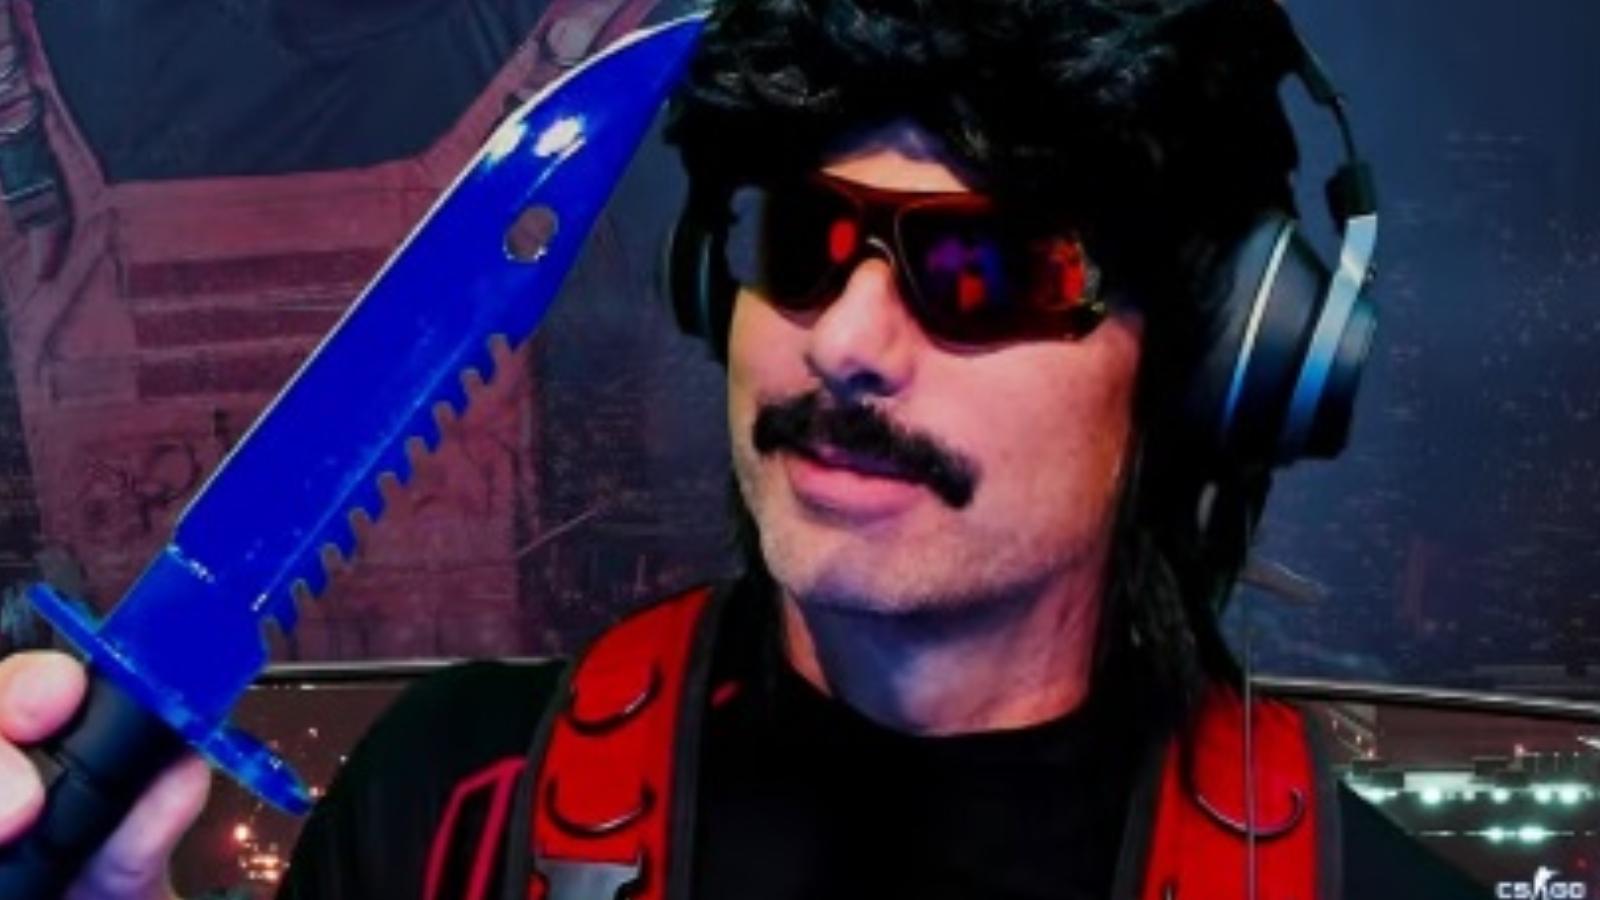 dr disrespect unboxes real CSGO knife